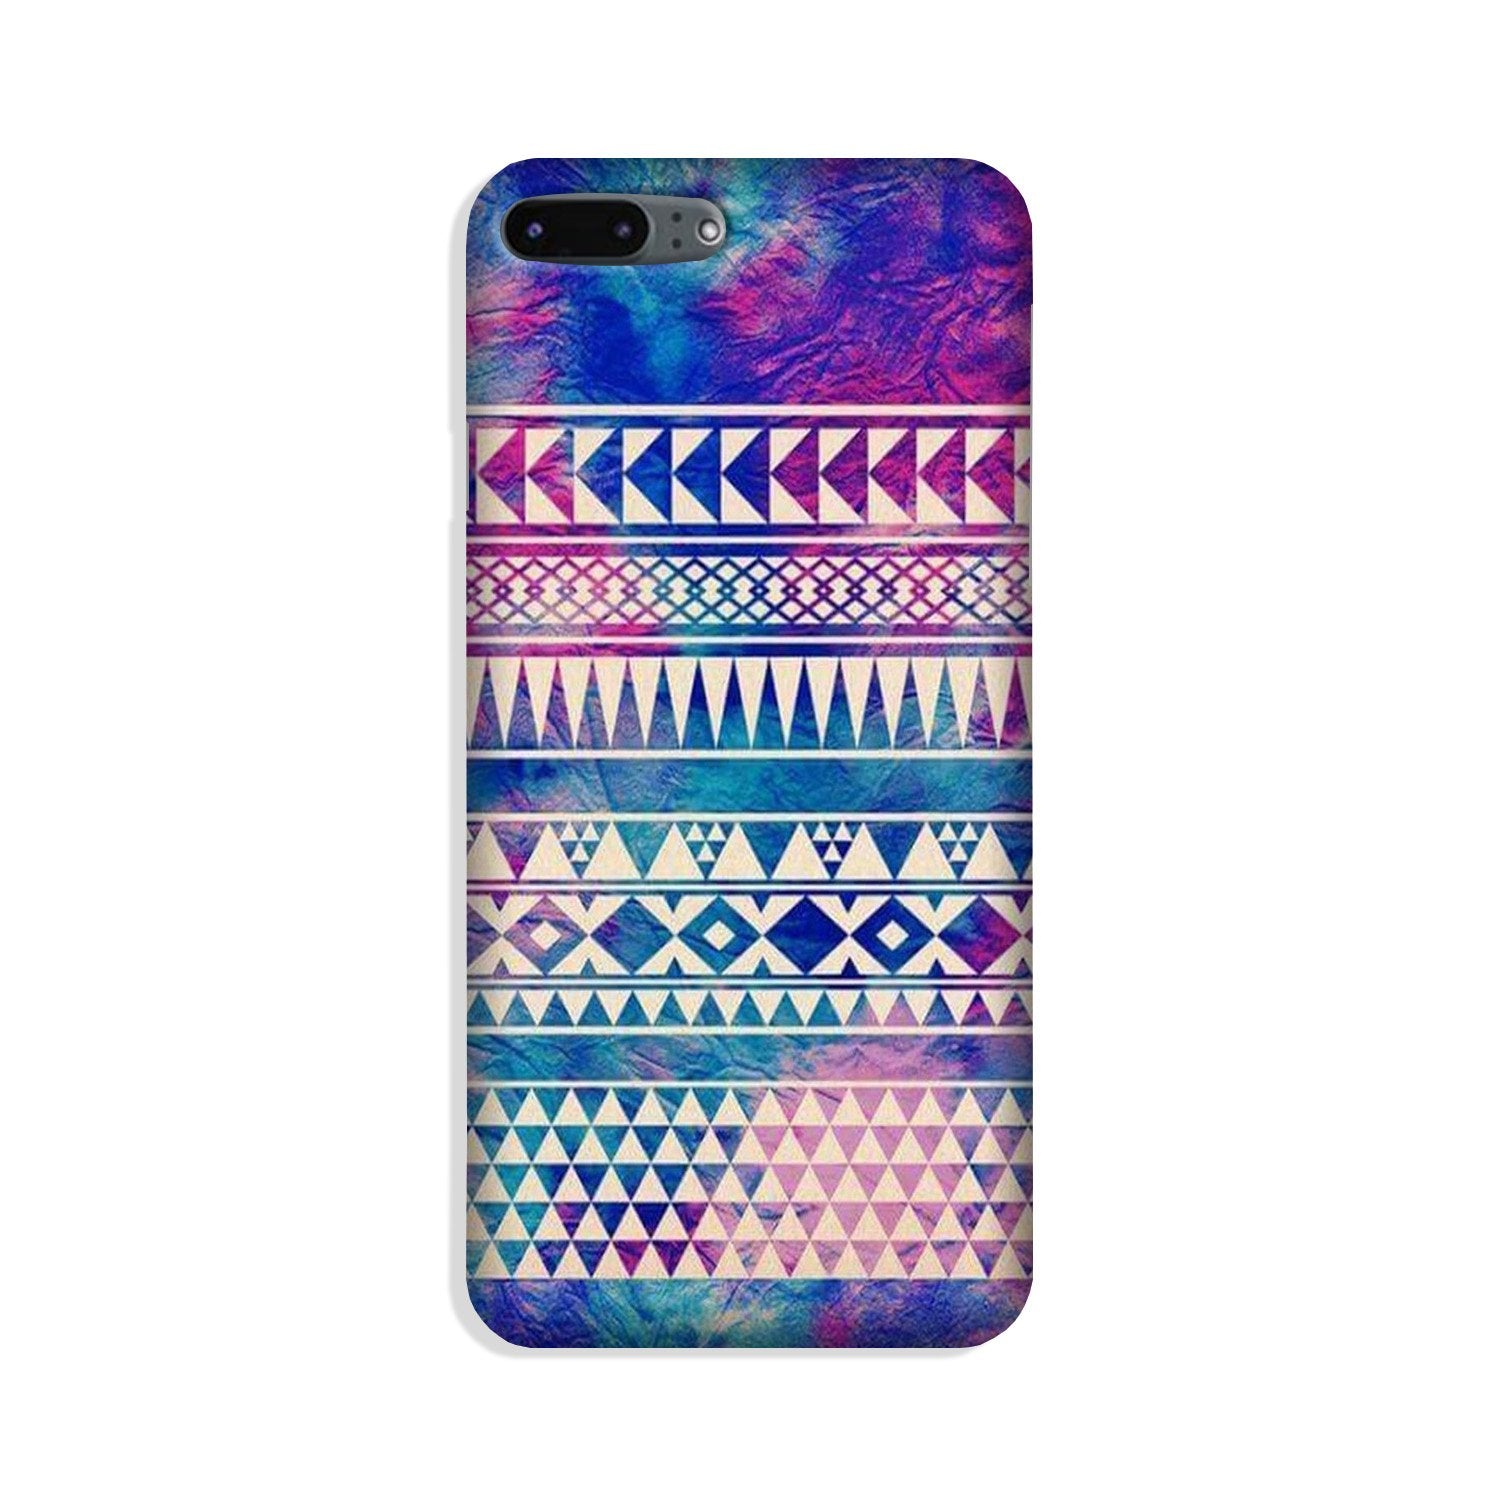 Modern Art Case for iPhone 8 Plus